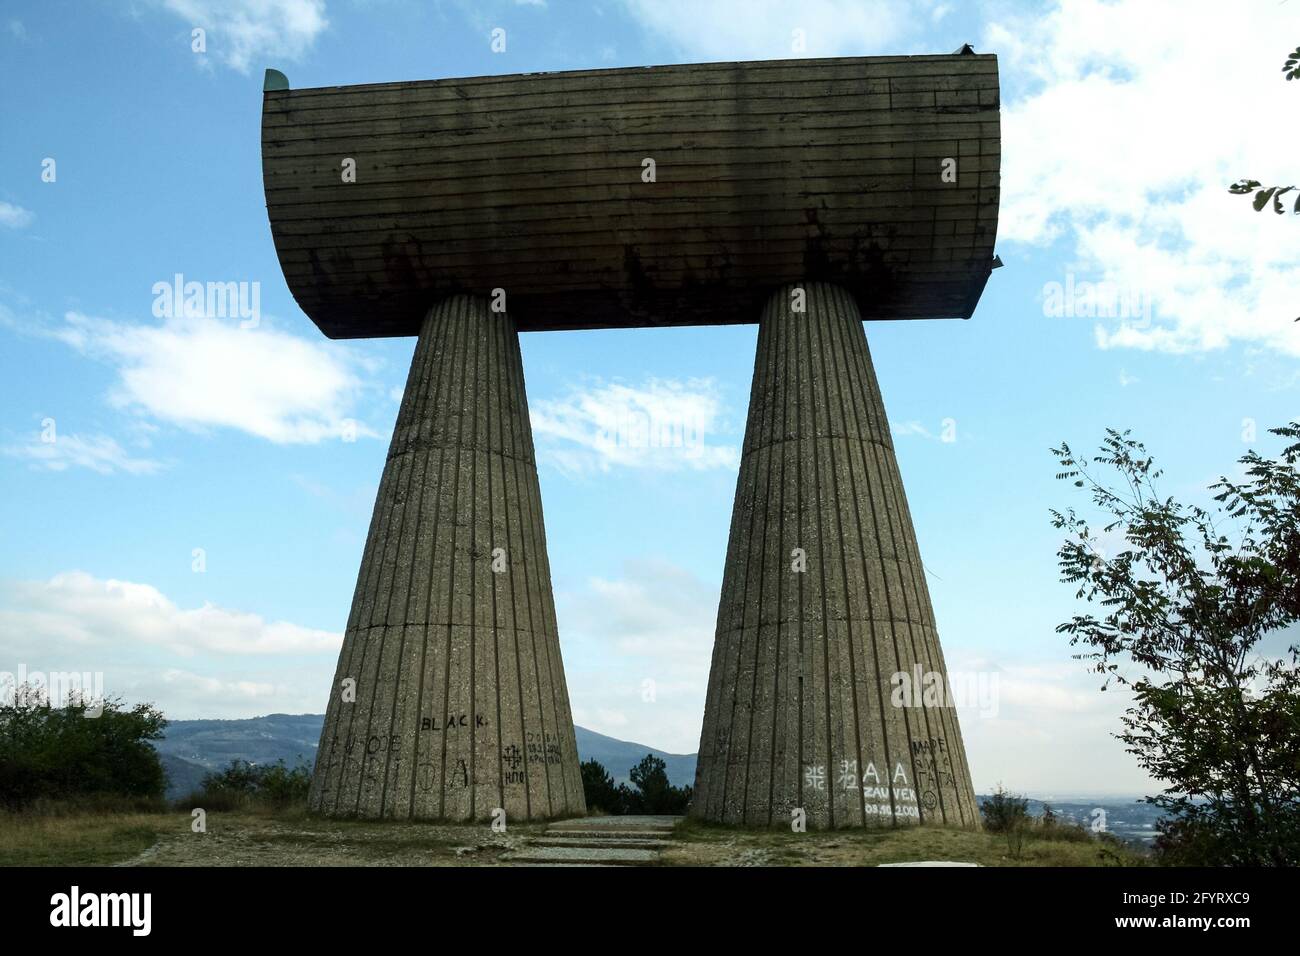 Picture of the monument to the miners of Kosovska Mitrovica, Kosovo. The Monument to the Serbian and Albanian Partisans (also known as the Monument to Stock Photo